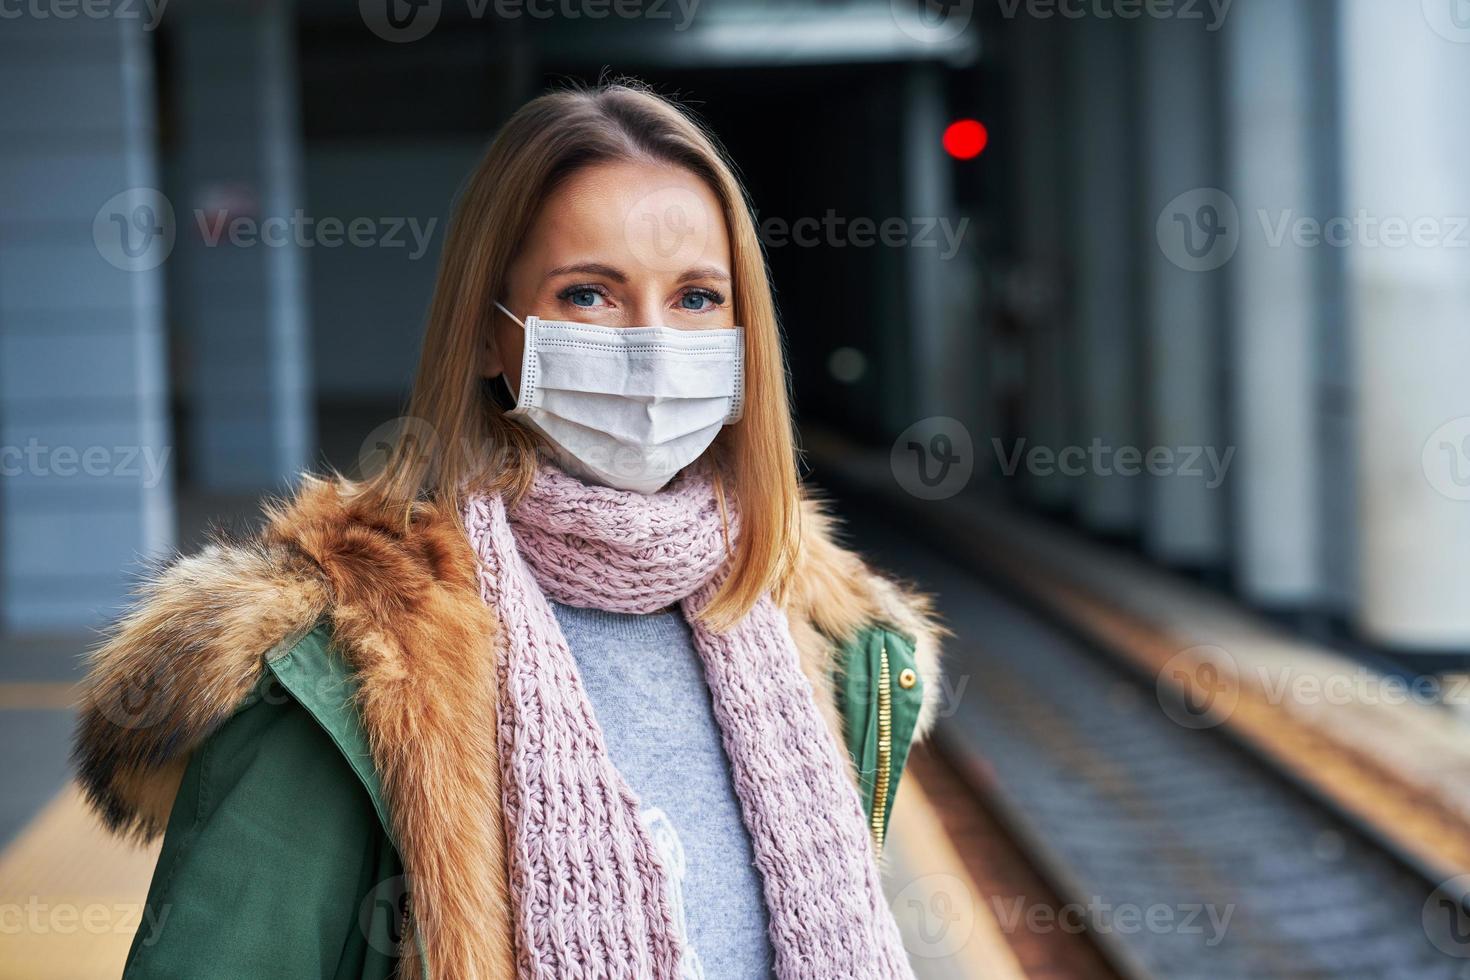 Adult woman at train station wearing masks due to covid-19 restrictions photo